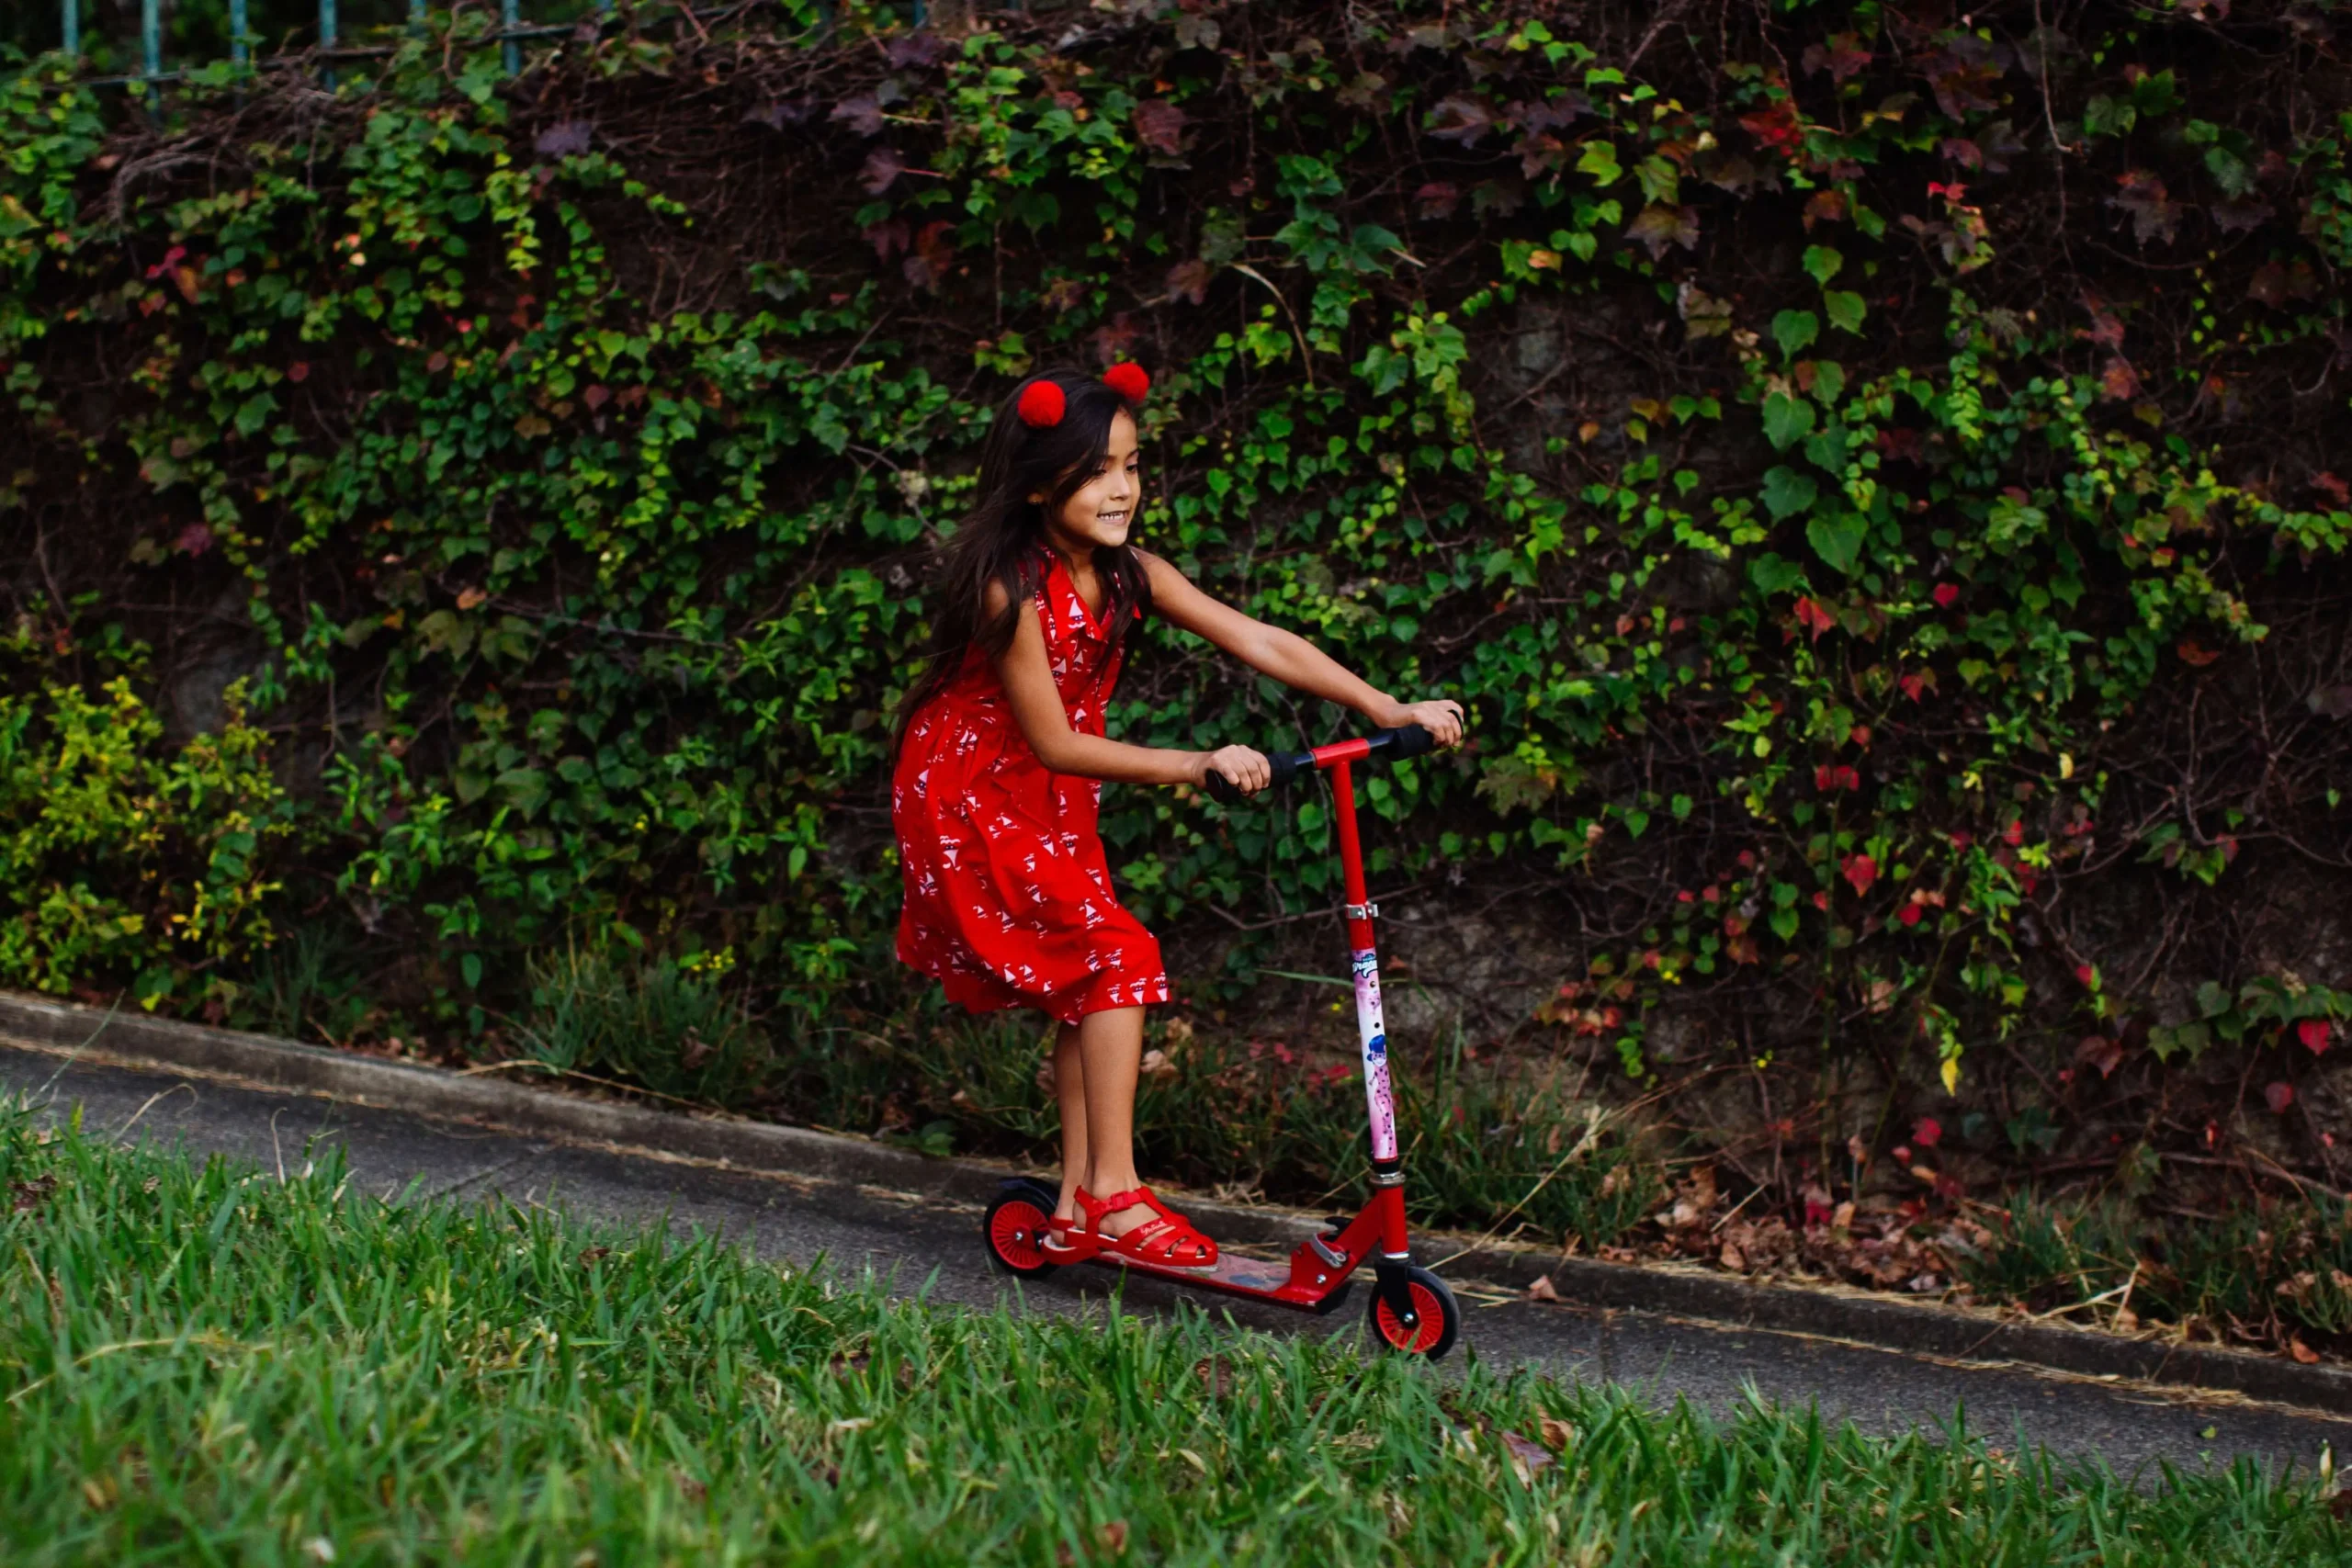 A girl in red frock riding a red scooter on the side of the grass